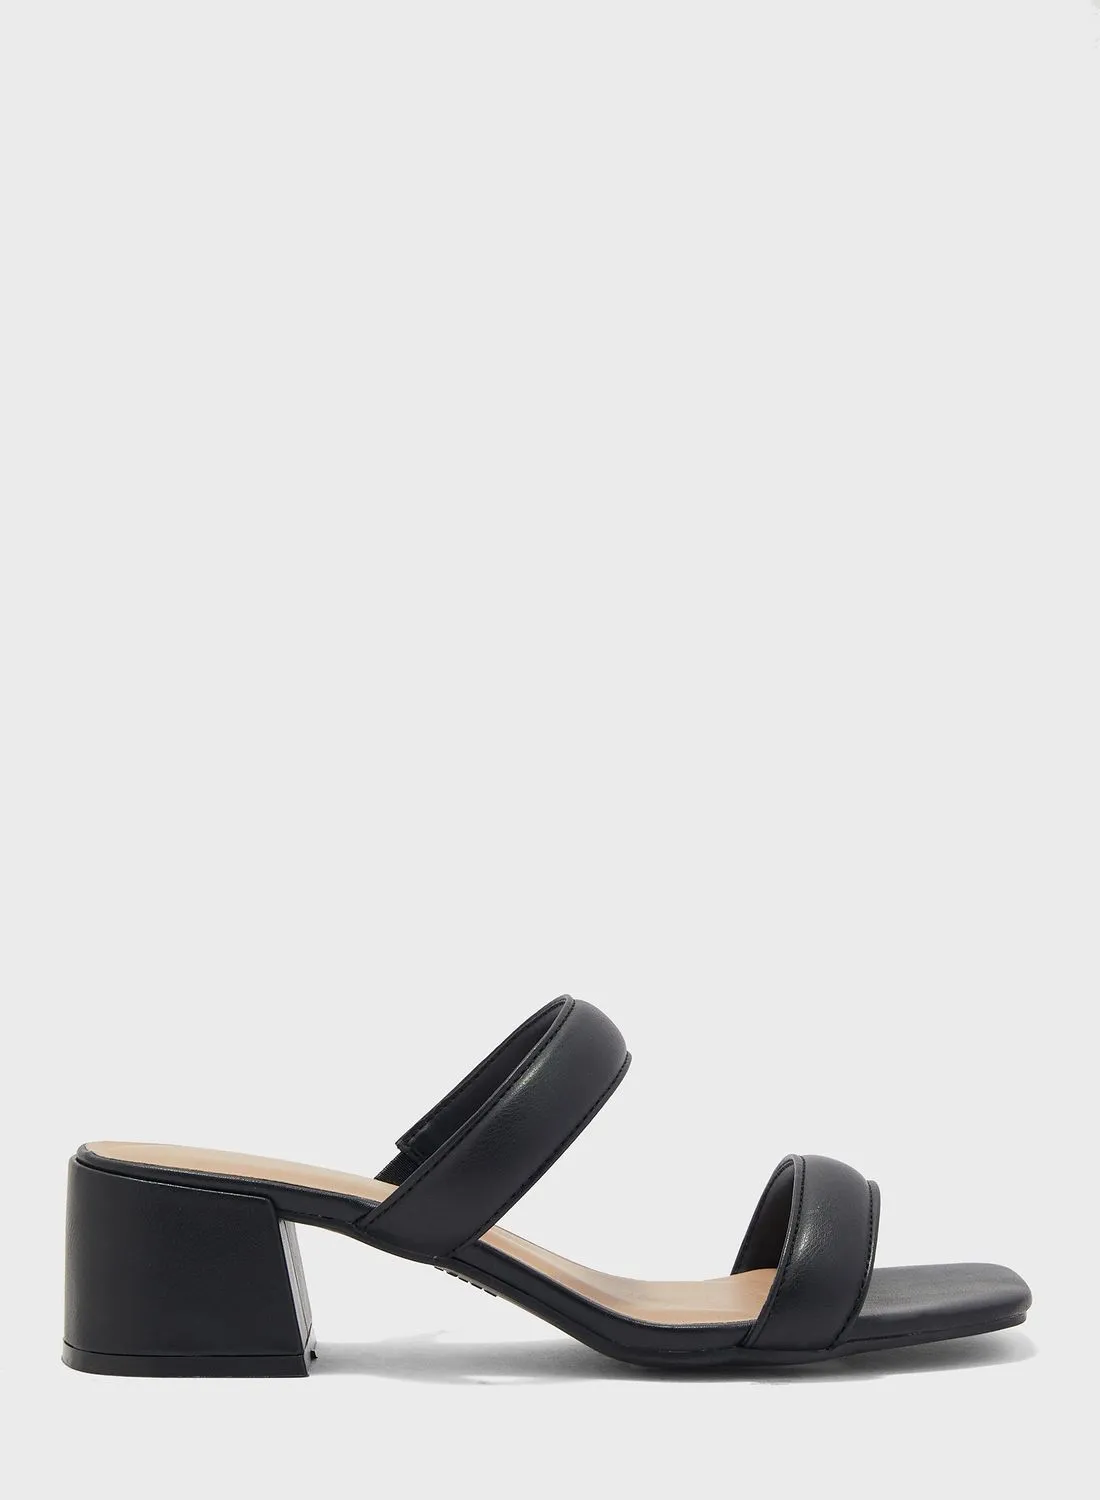 NEW LOOK Todi Ankle Strap Sandals